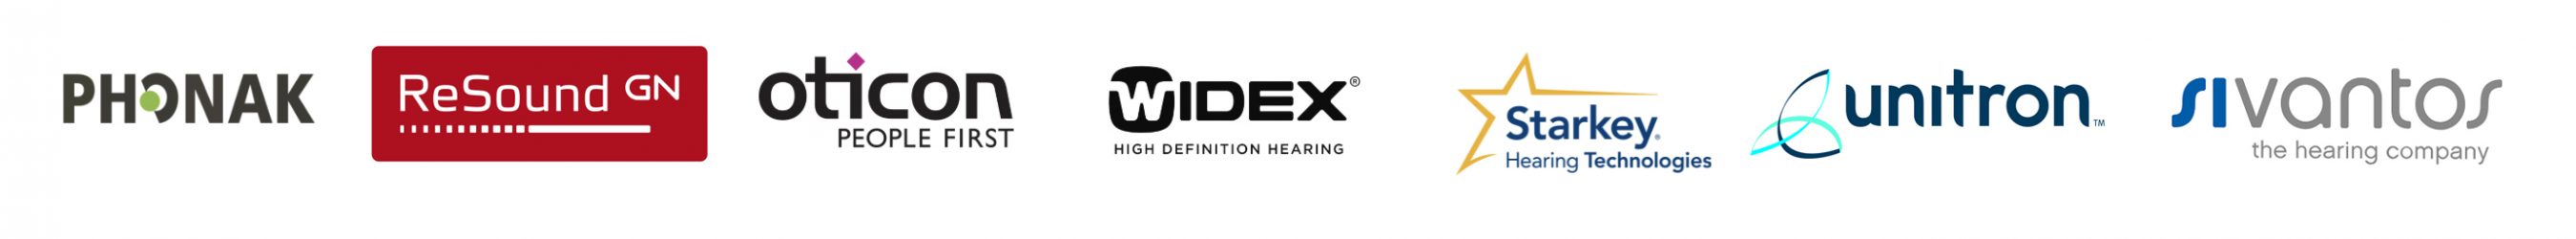 The Hearing Suite Brand Logos